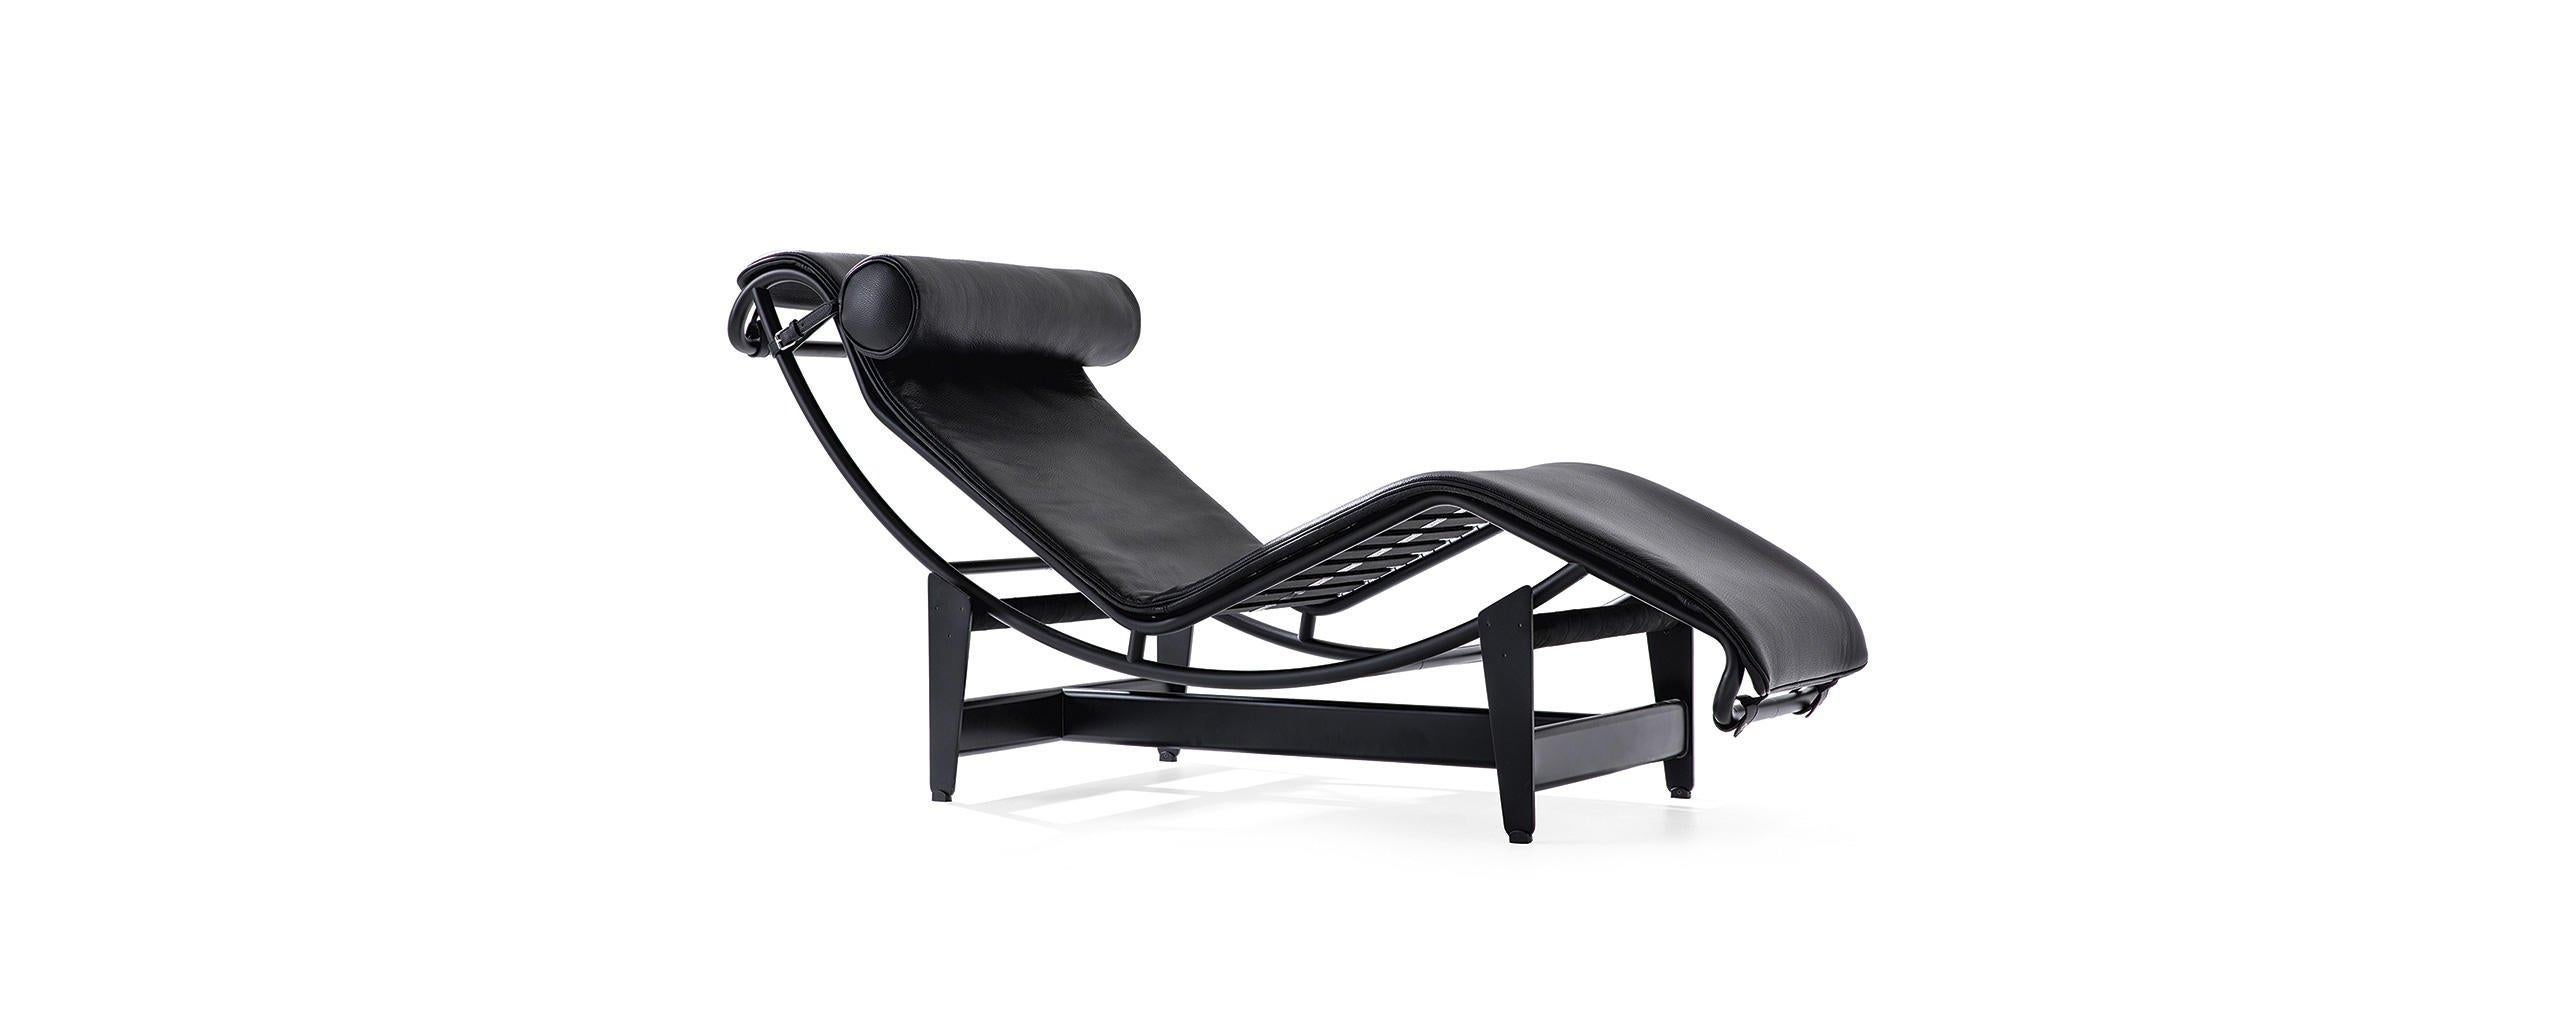 Chaise lounge designed by Le Corbusier, Pierre Jeanneret, Charlotte Perriand in 1965. Relaunched in 2019.
Manufactured by Cassina in Italy.

One of Cassina’s worldwide best-sellers, the LC4 is the quintessential chaise longue, designed in 1928,